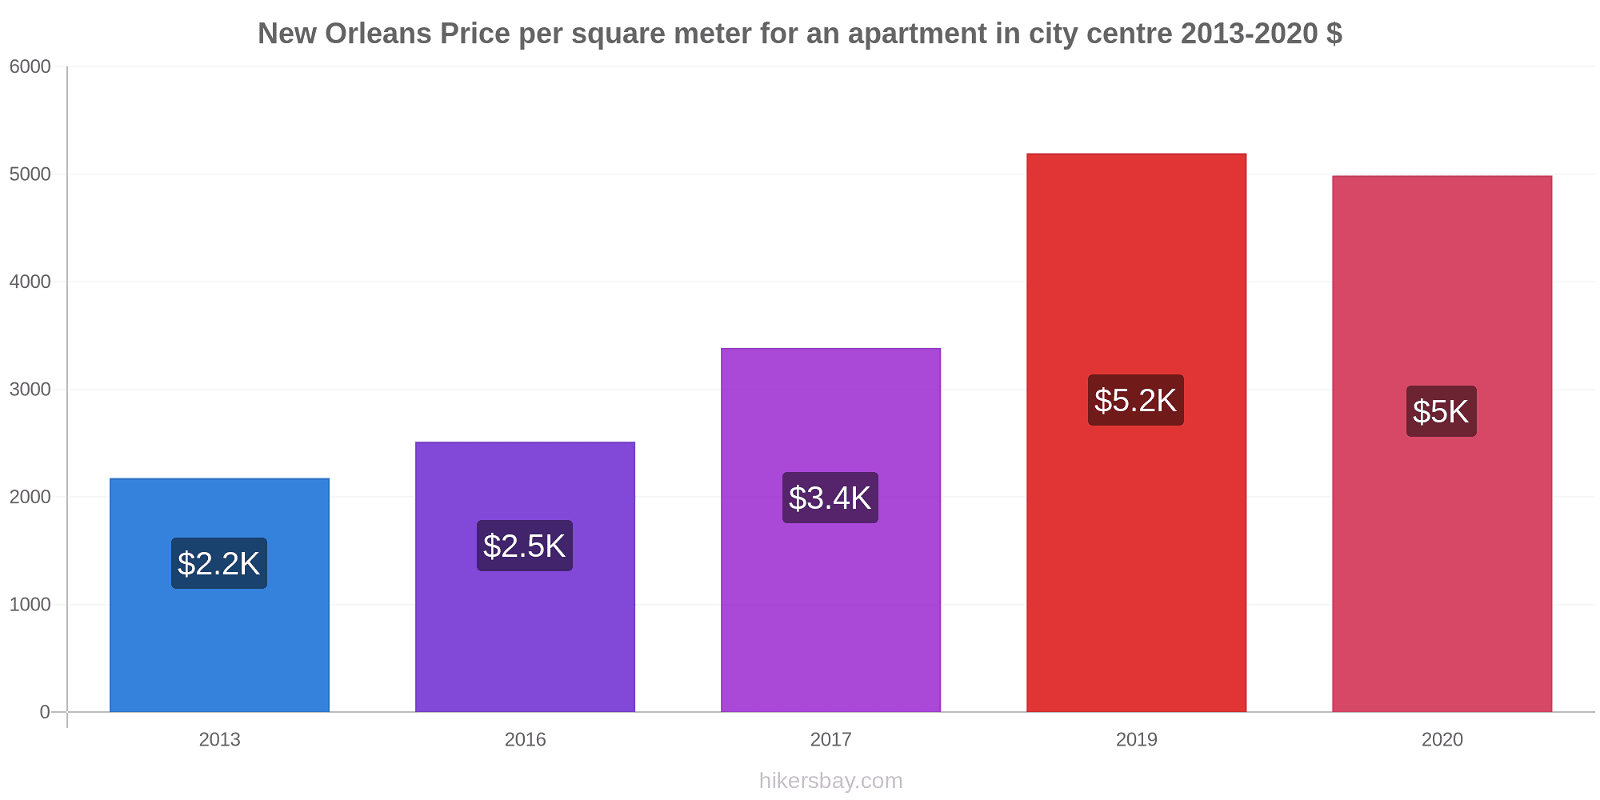 New Orleans price changes Price per square meter for an apartment in city centre hikersbay.com